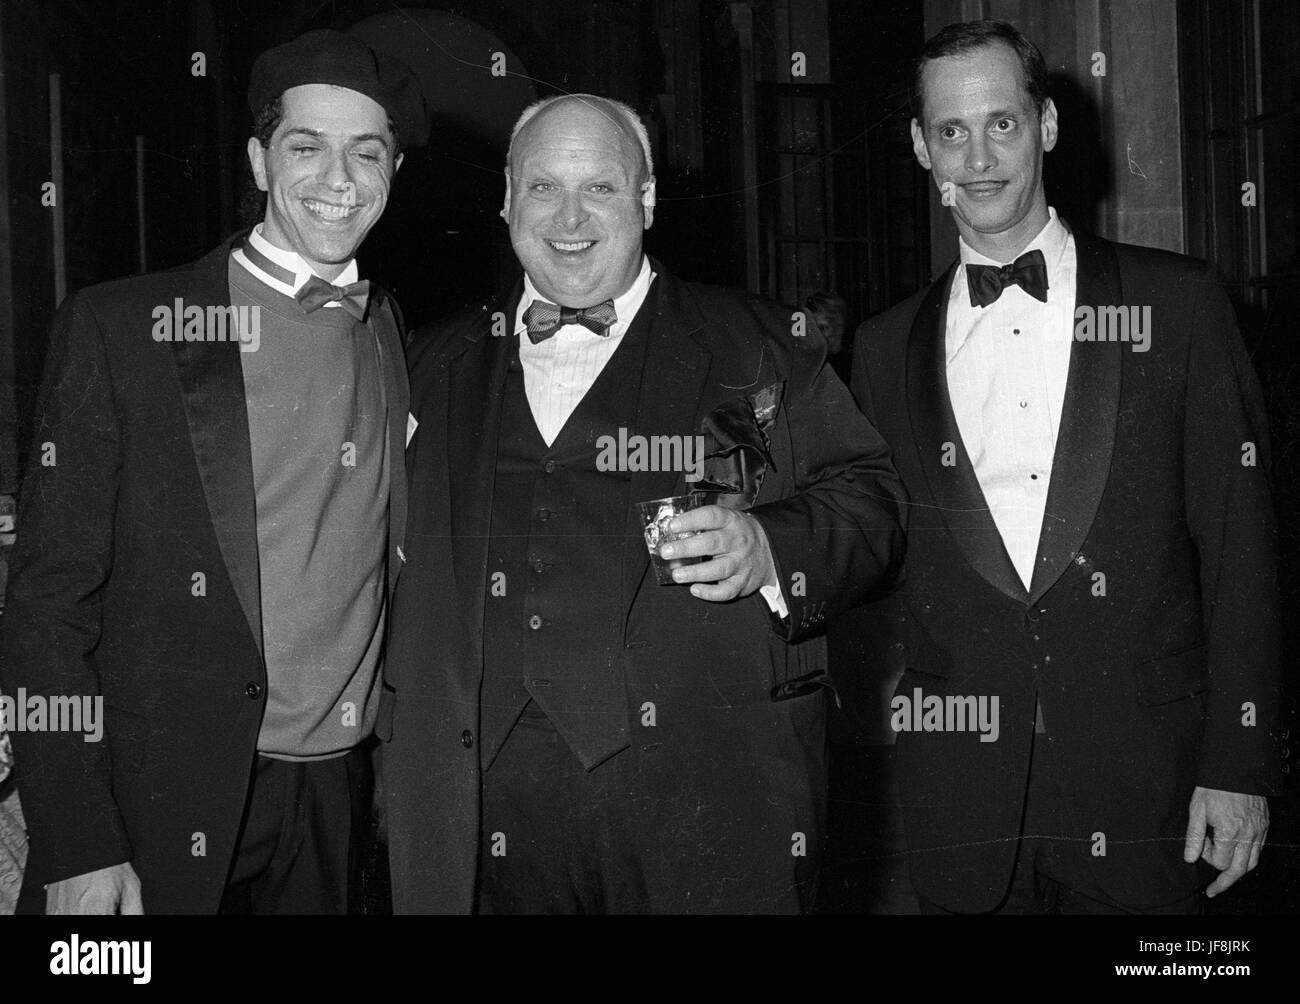 Baltimore, MD February 16, 1988  Divine (Harris Glen Milstead) in the middle with director, John Waters (right) and an unknown friend at the premiere of the orginial movie, 'Hairspray'  Divine died six weeks after the premiere.  Credit: Patsy Lynch/MediaPunch Stock Photo